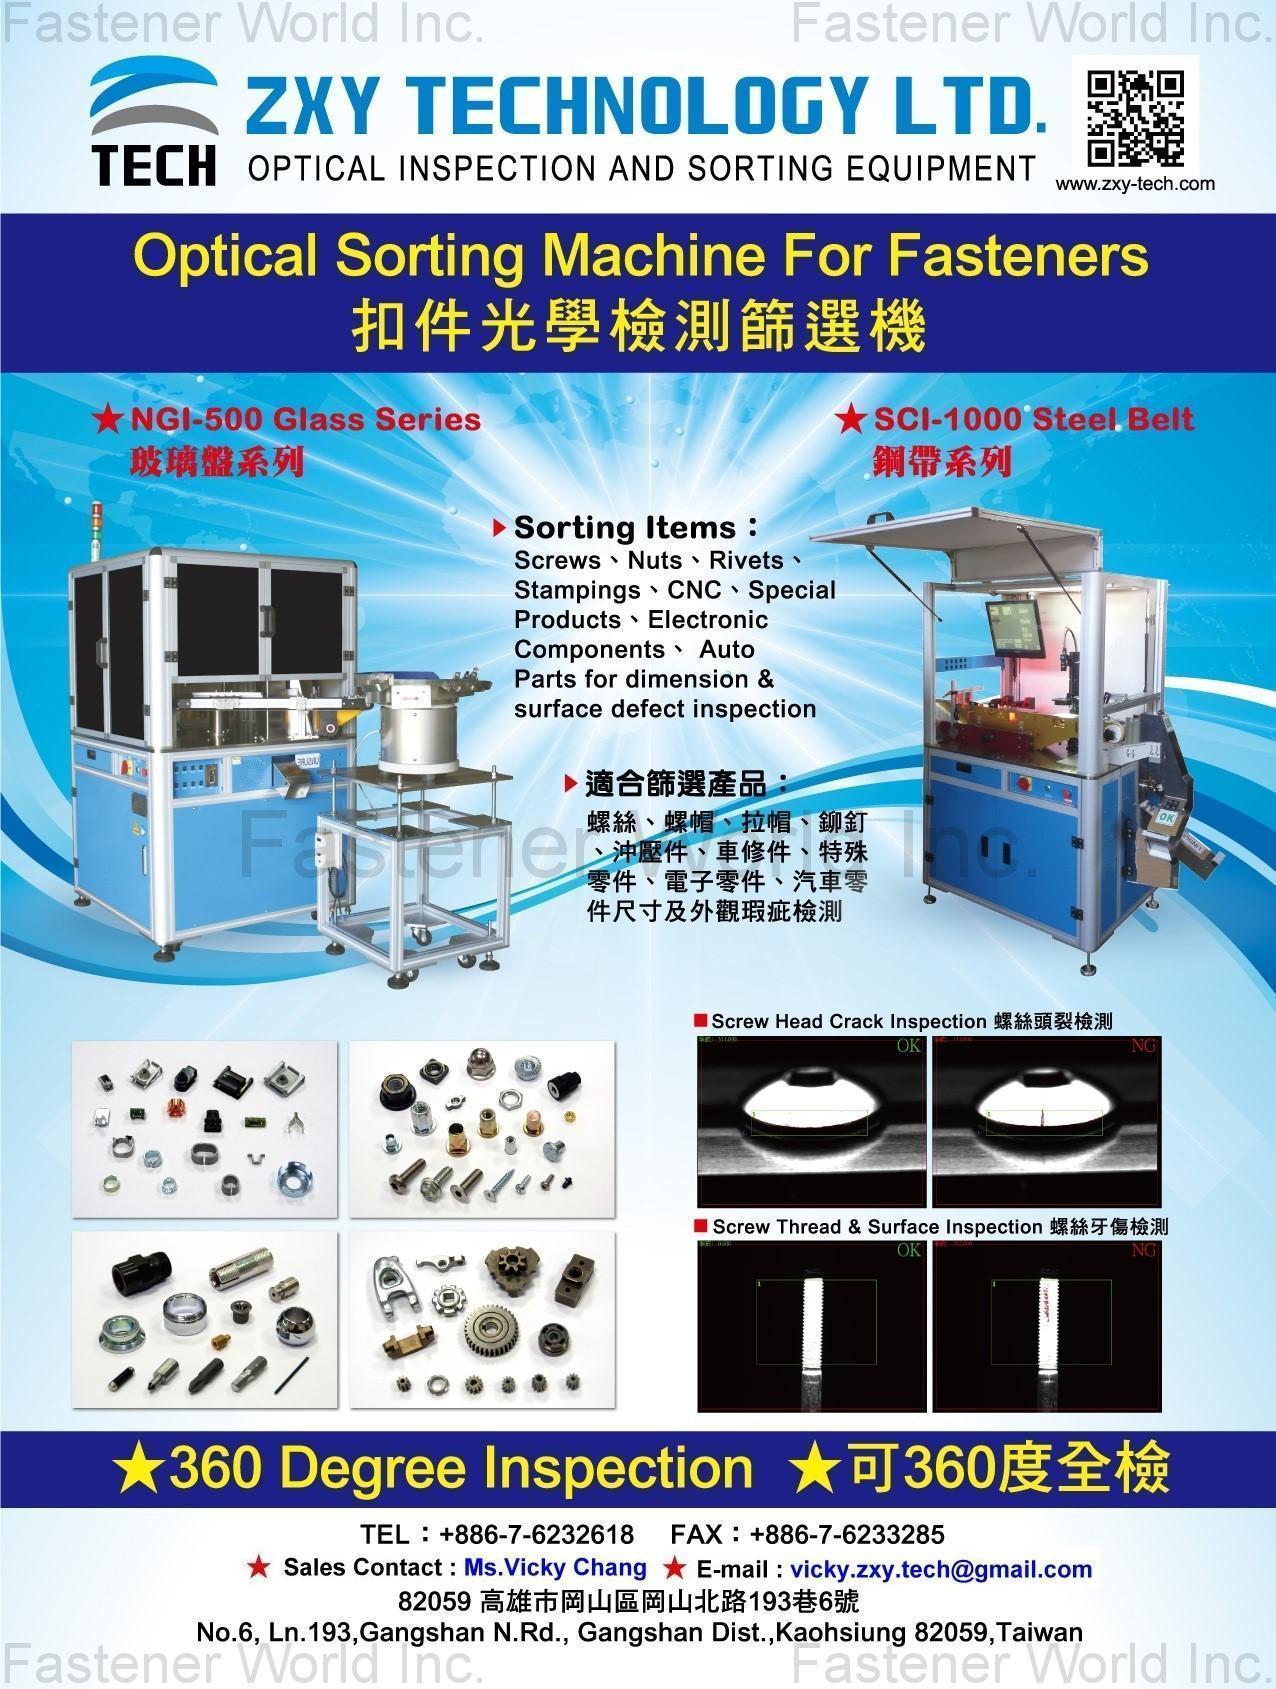 ZXY Technology Ltd. Optical Inspection Sorting Machine For 